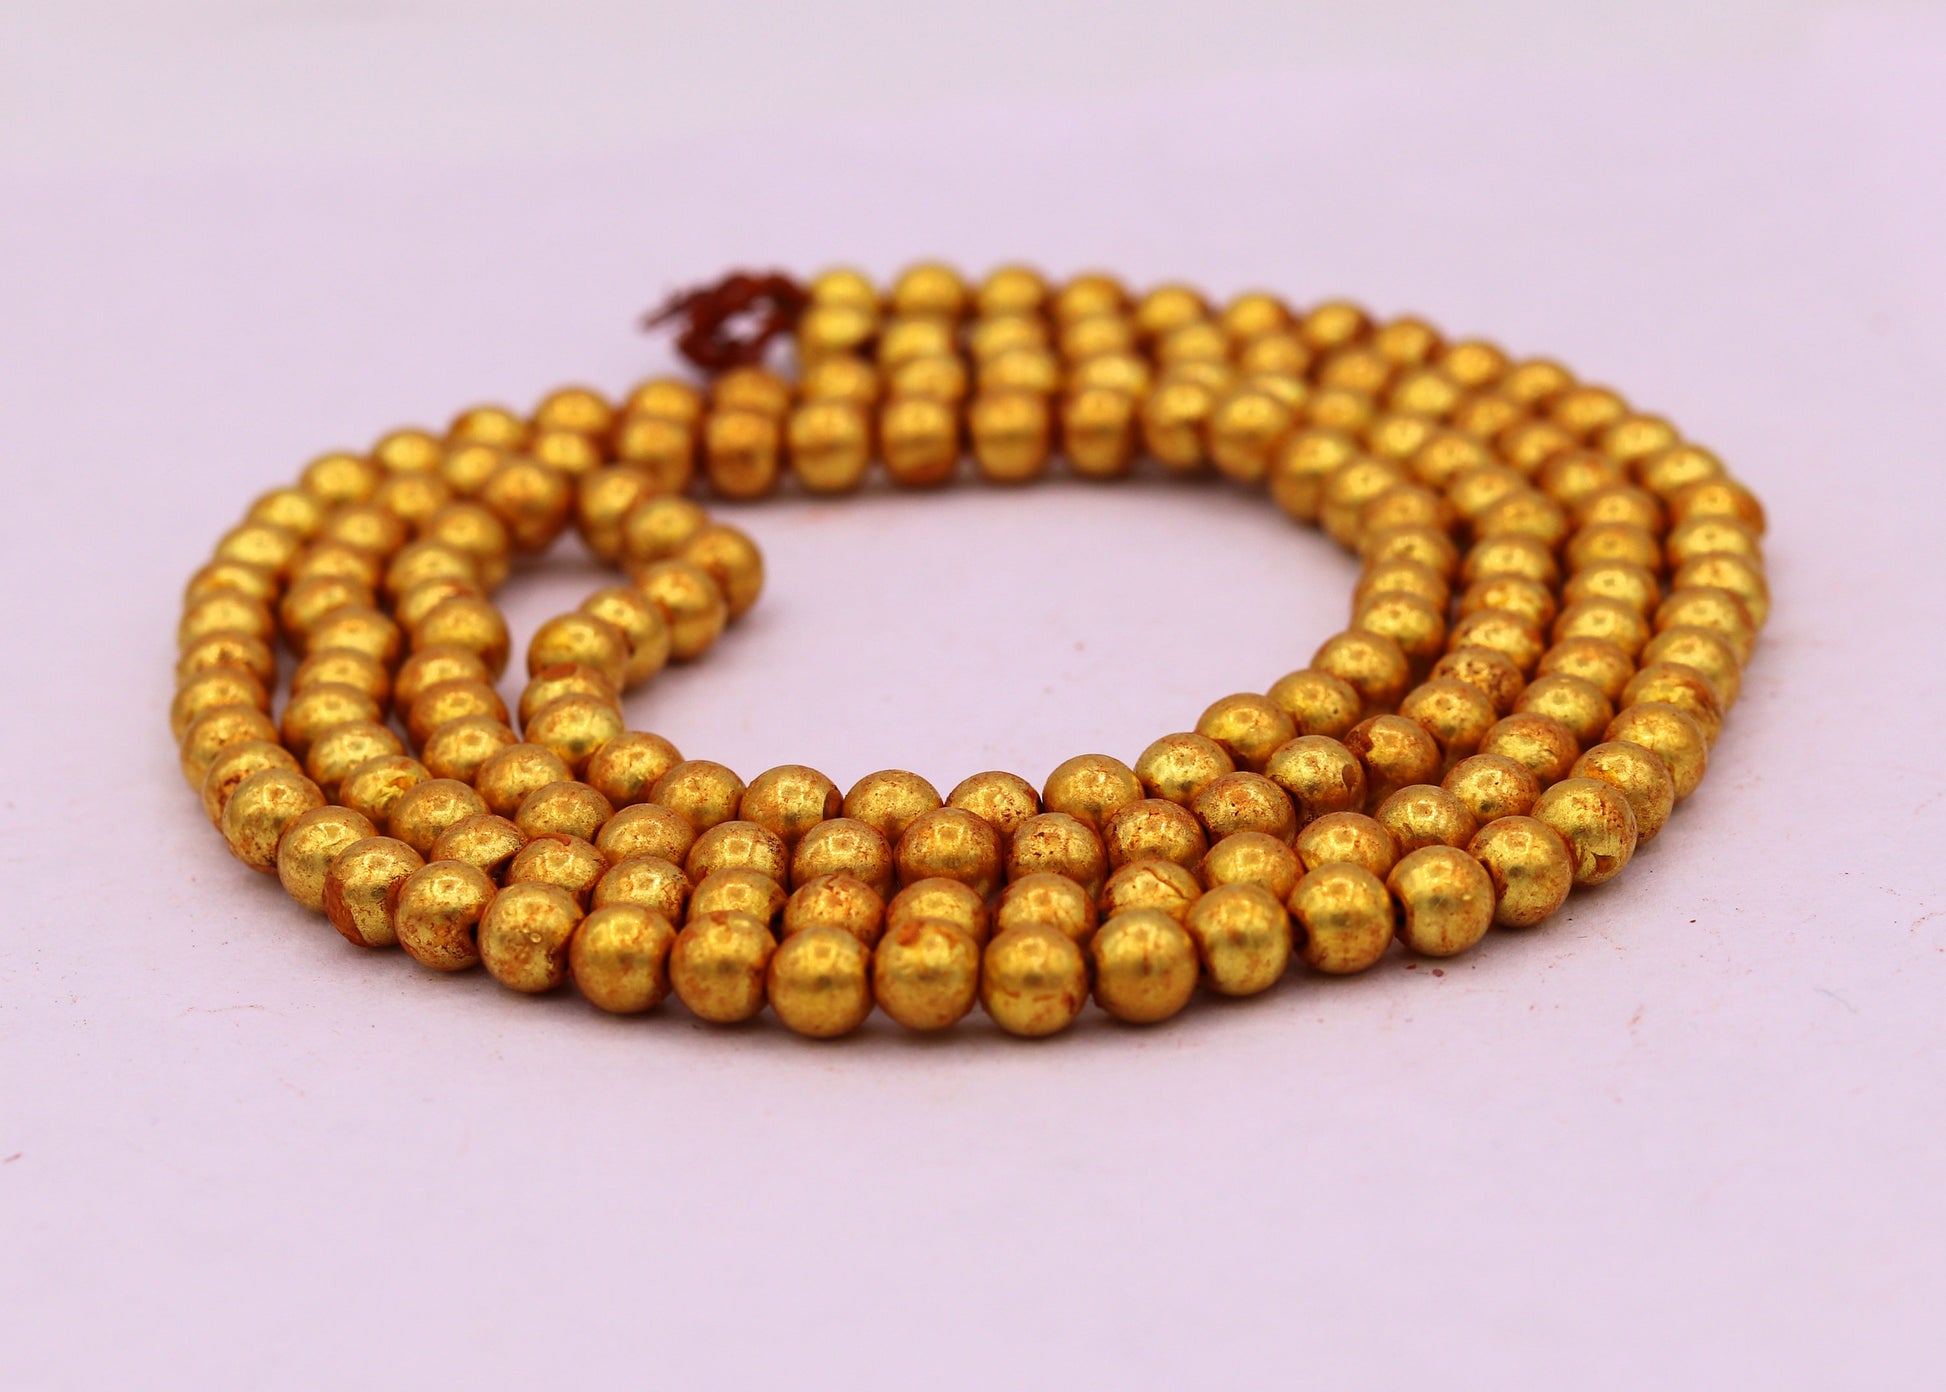 Lot 10 beads 22K yellow gold handmade excellent round shape ball to make some thing new jewelry design traditional india jewelry - TRIBAL ORNAMENTS